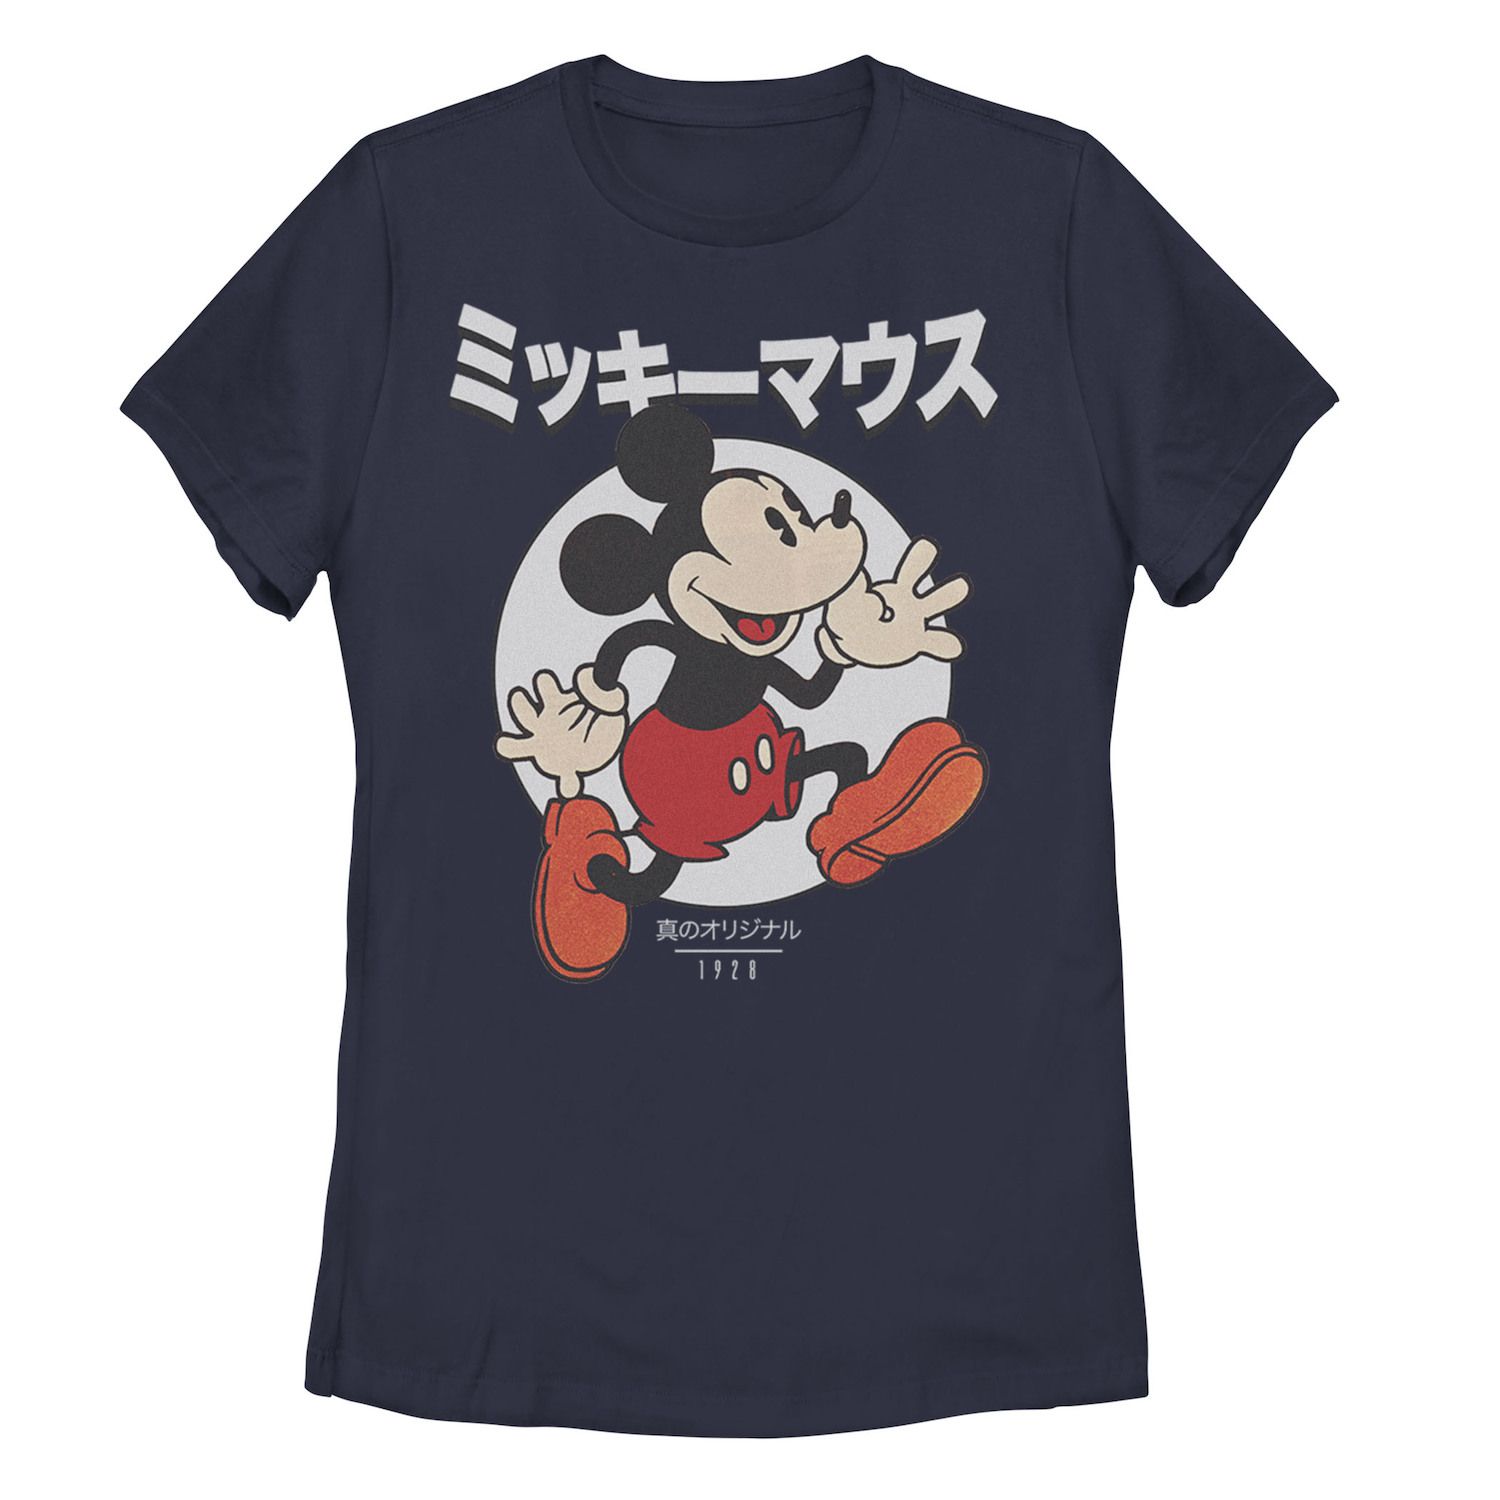 Image for Licensed Character Disney's Mickey Mouse Juniors' Kanji Vintage Logo Graphic Tee at Kohl's.